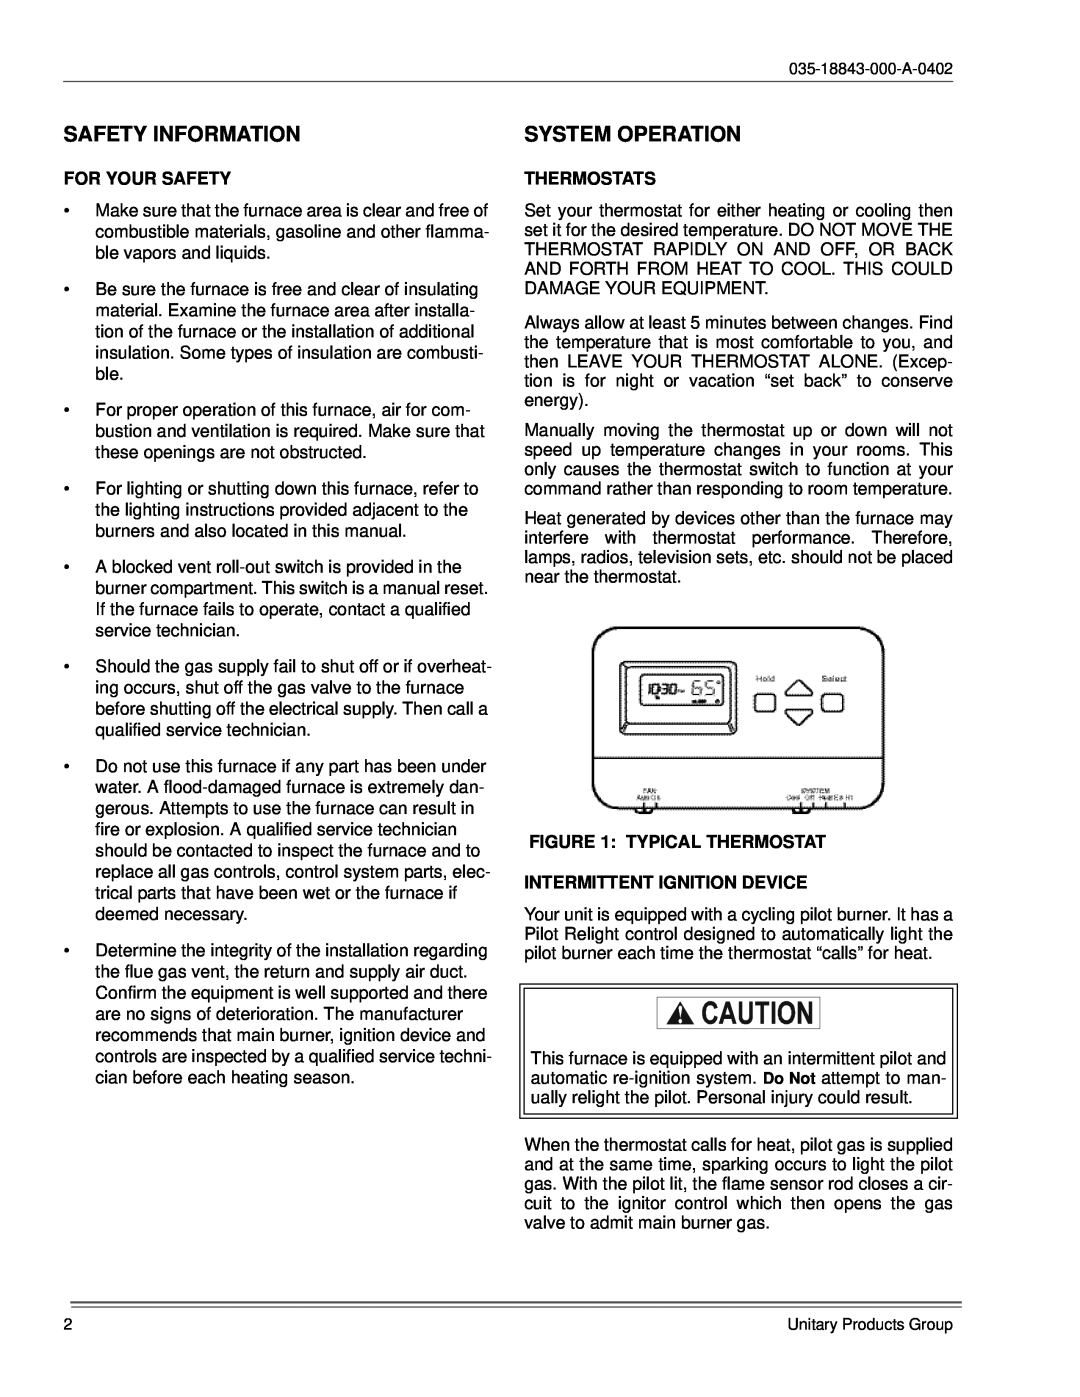 York 035-18843-000-a-0402 manual Safety Information, System Operation, For Your Safety, Thermostats, Typical Thermostat 